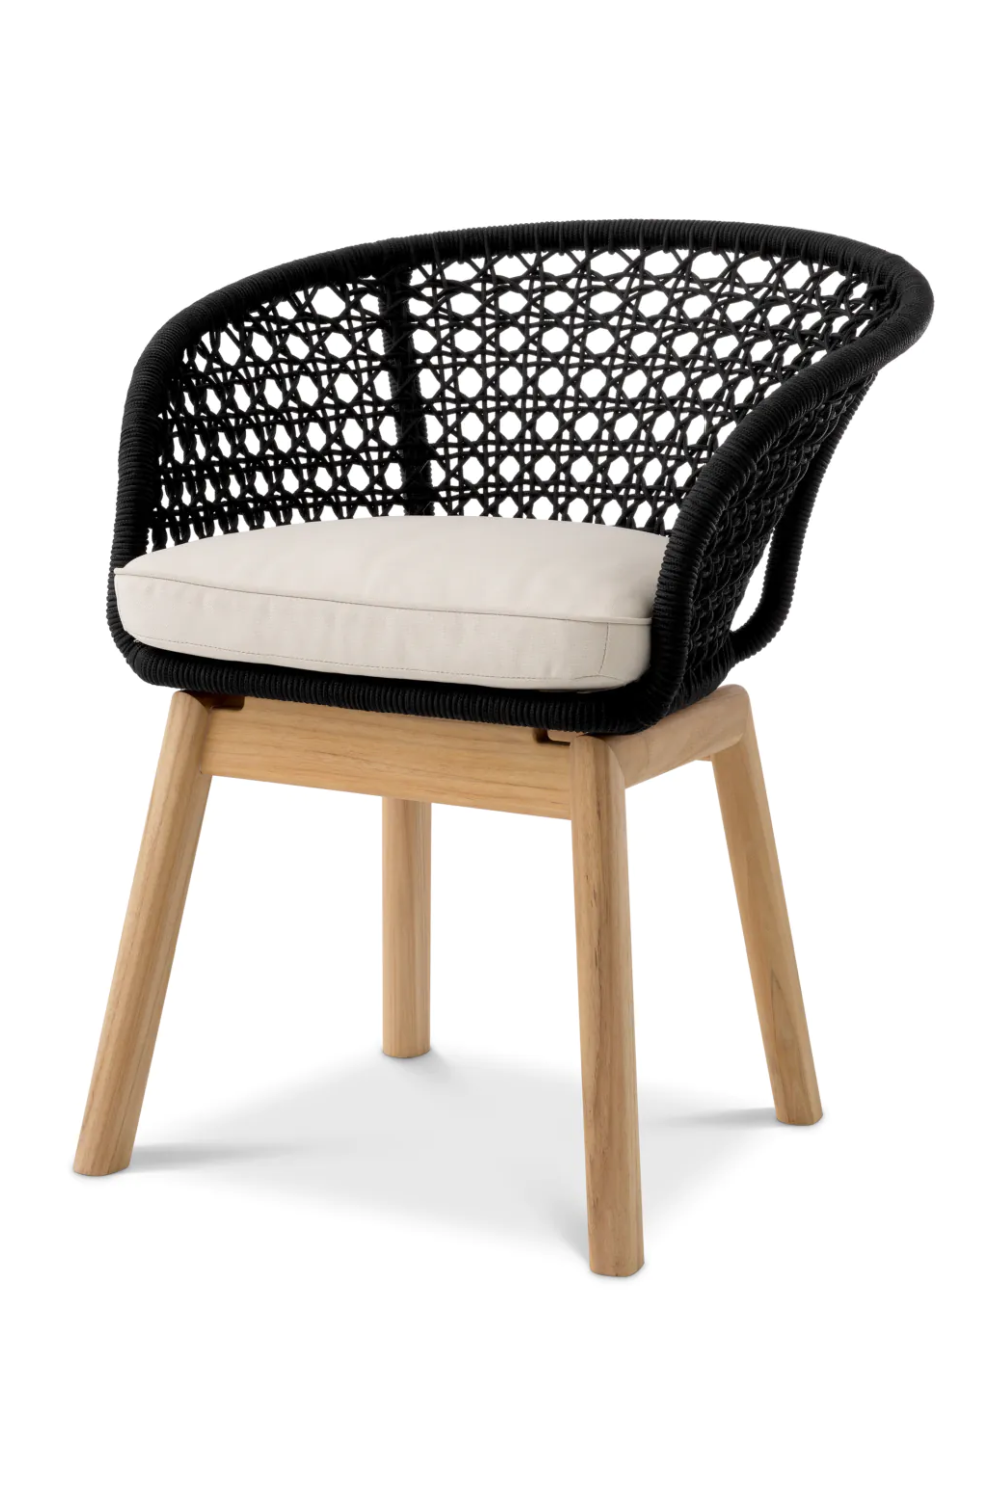 Modern Rope Outdoor Dining Chair, Eichholtz Trinity